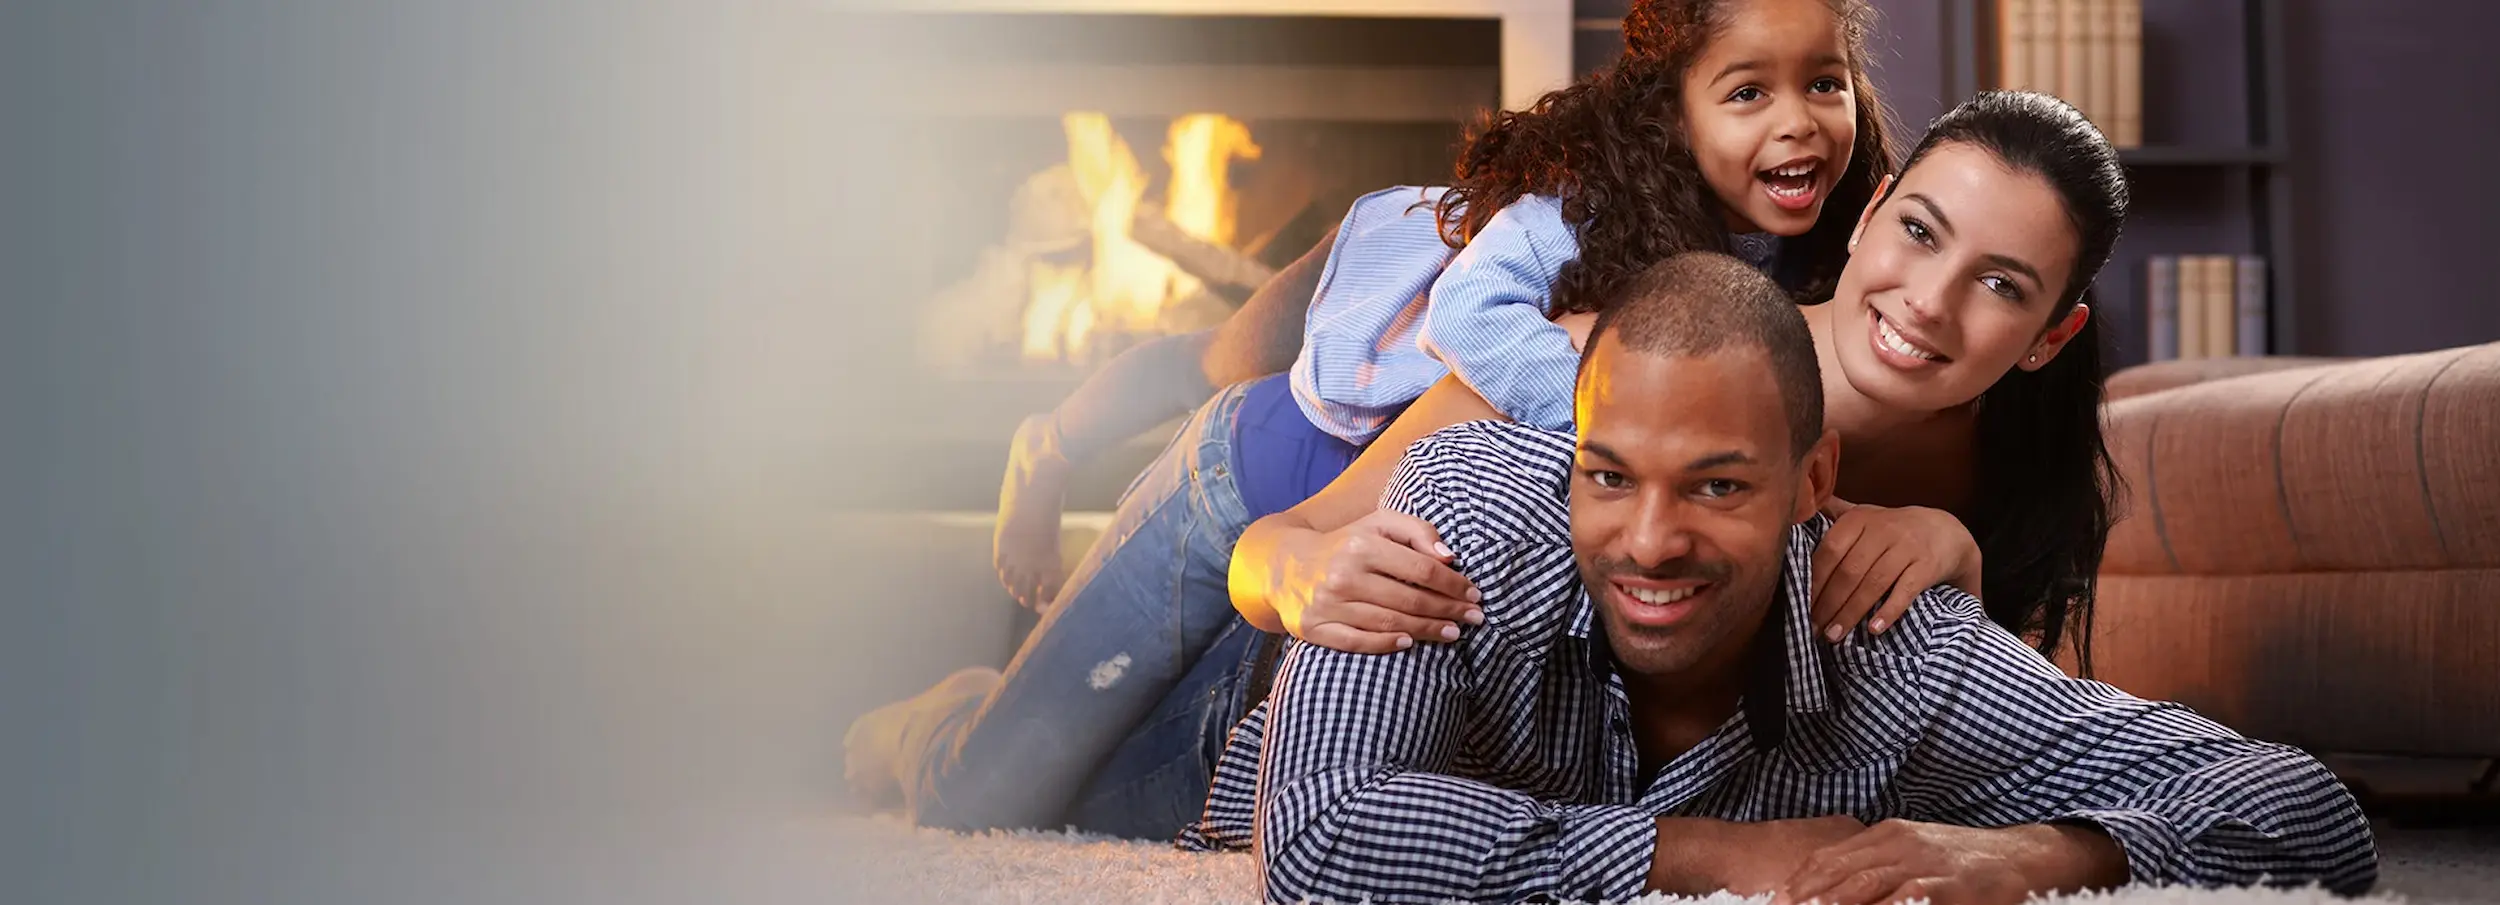 Smiling black couple and child laying on floor in brightly lit living room interior.